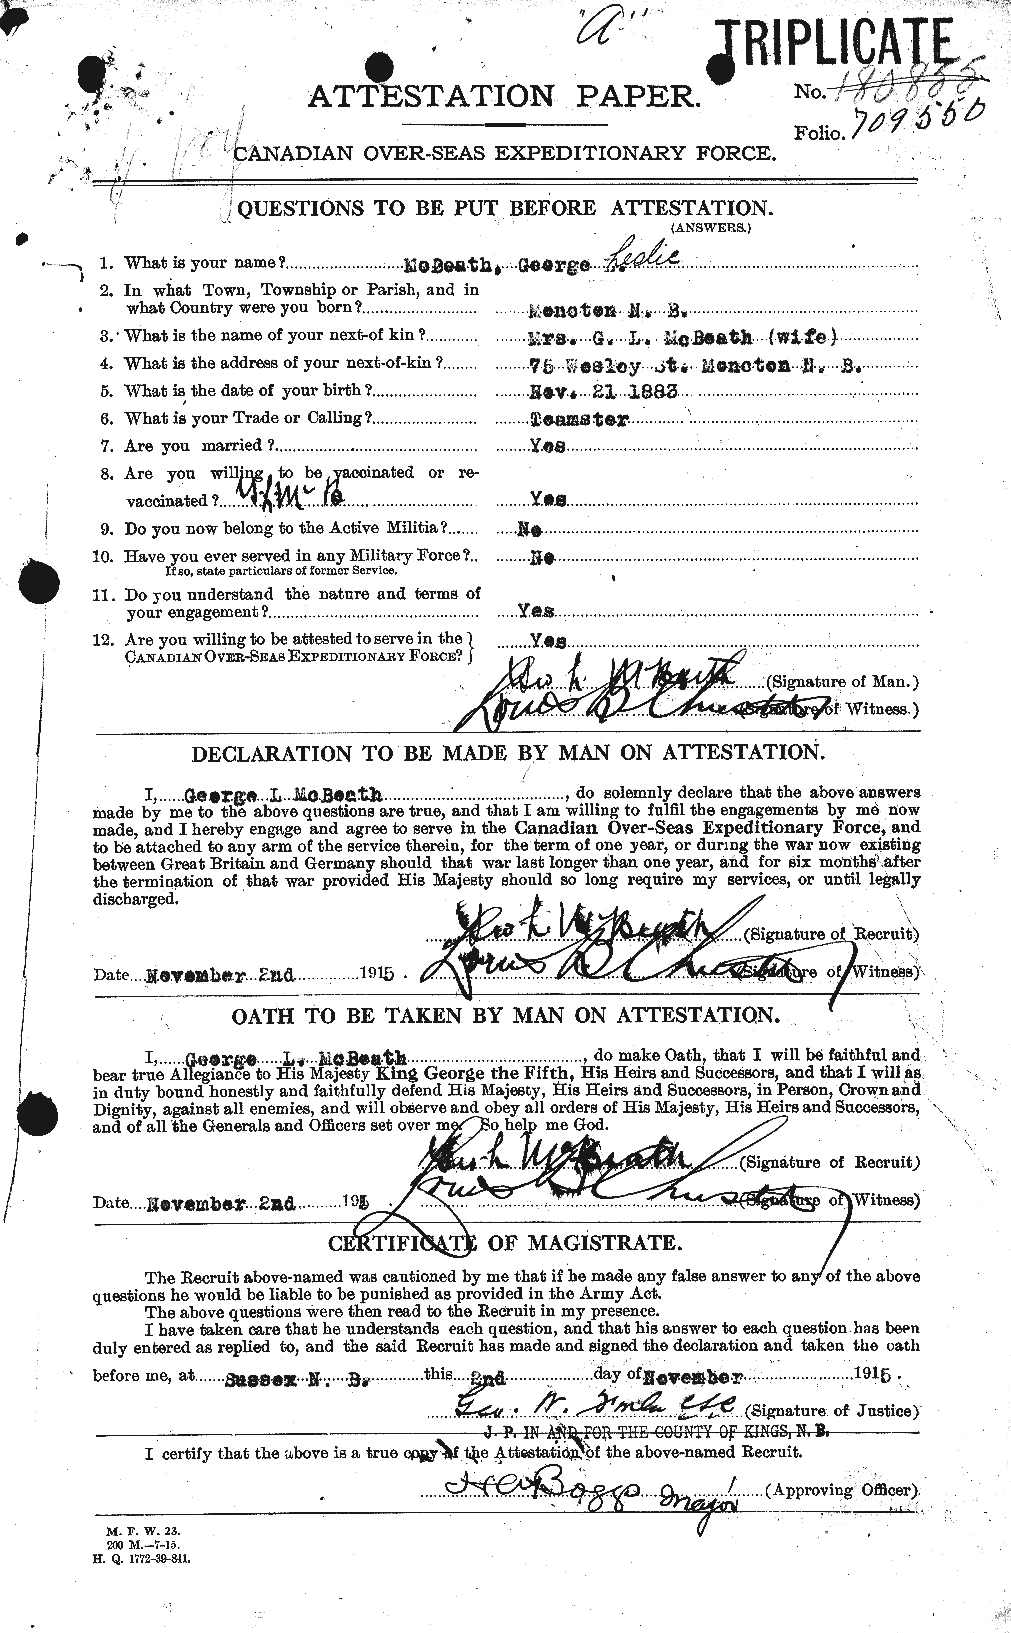 Personnel Records of the First World War - CEF 132385a